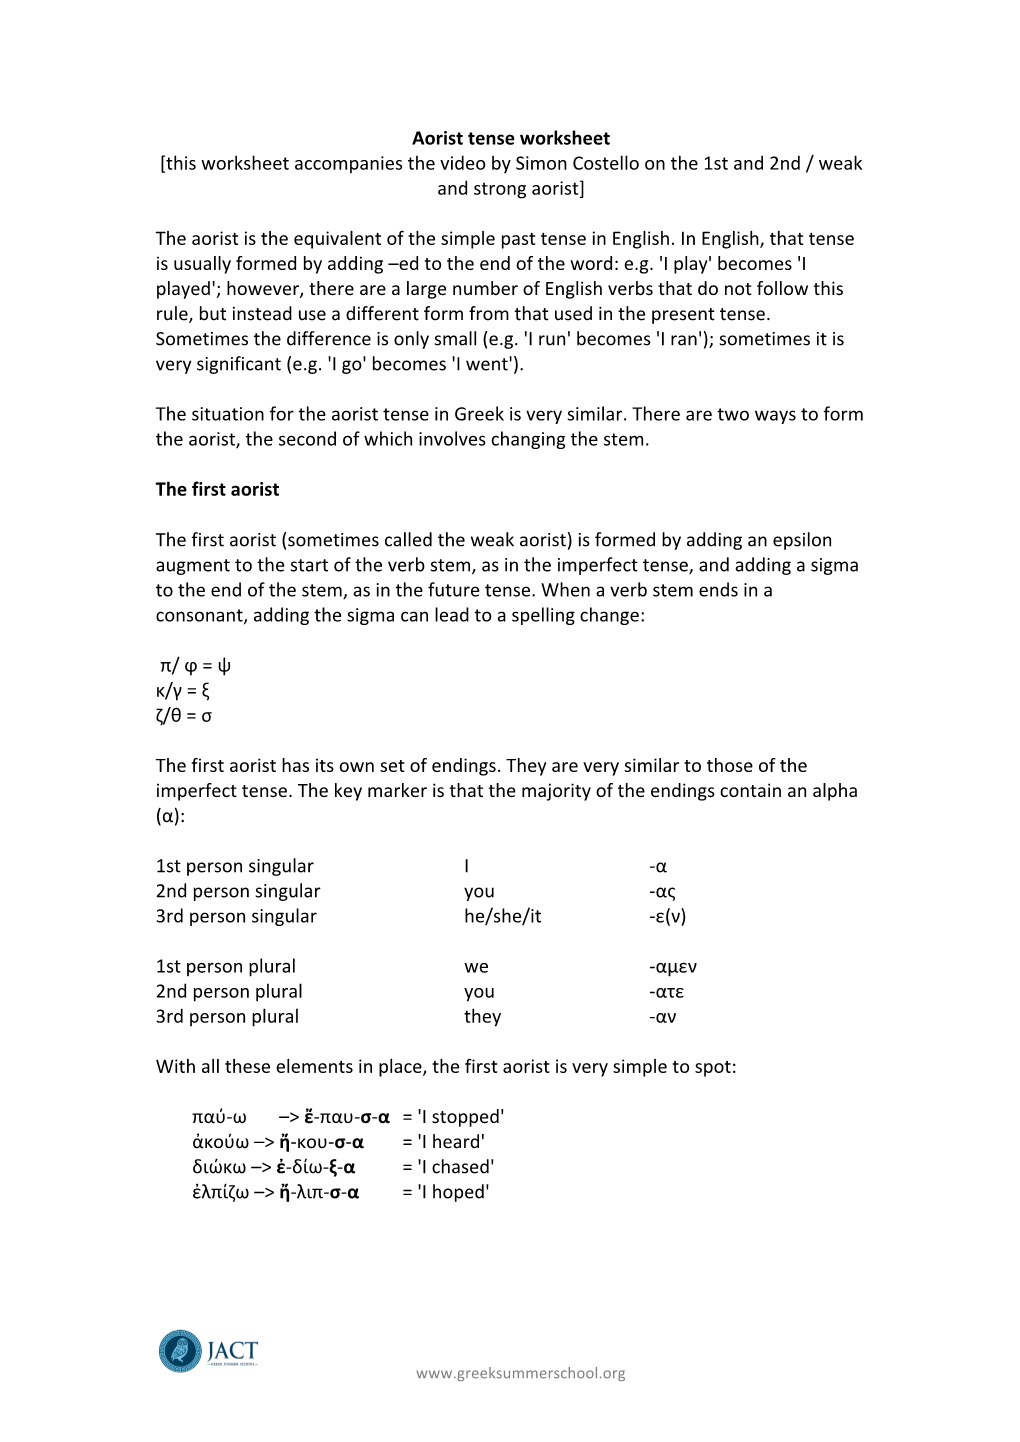 Aorist Tense Worksheet [This Worksheet Accompanies the Video by Simon Costello on the 1St and 2Nd / Weak and Strong Aorist]